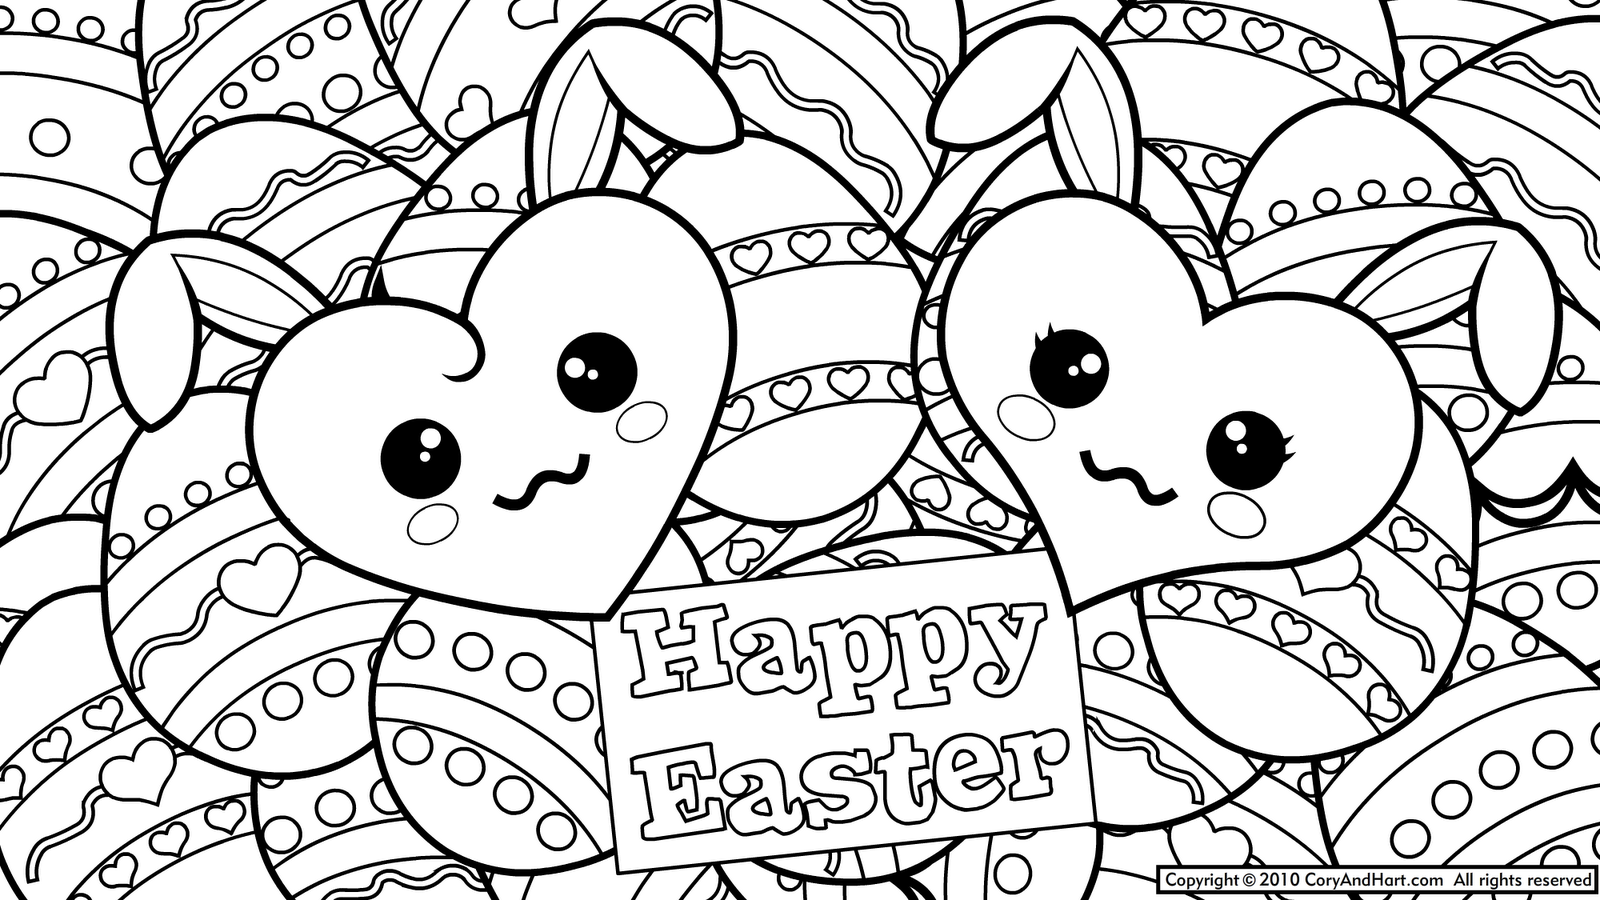 Disney Easter Coloring Sheets | Coloring Online